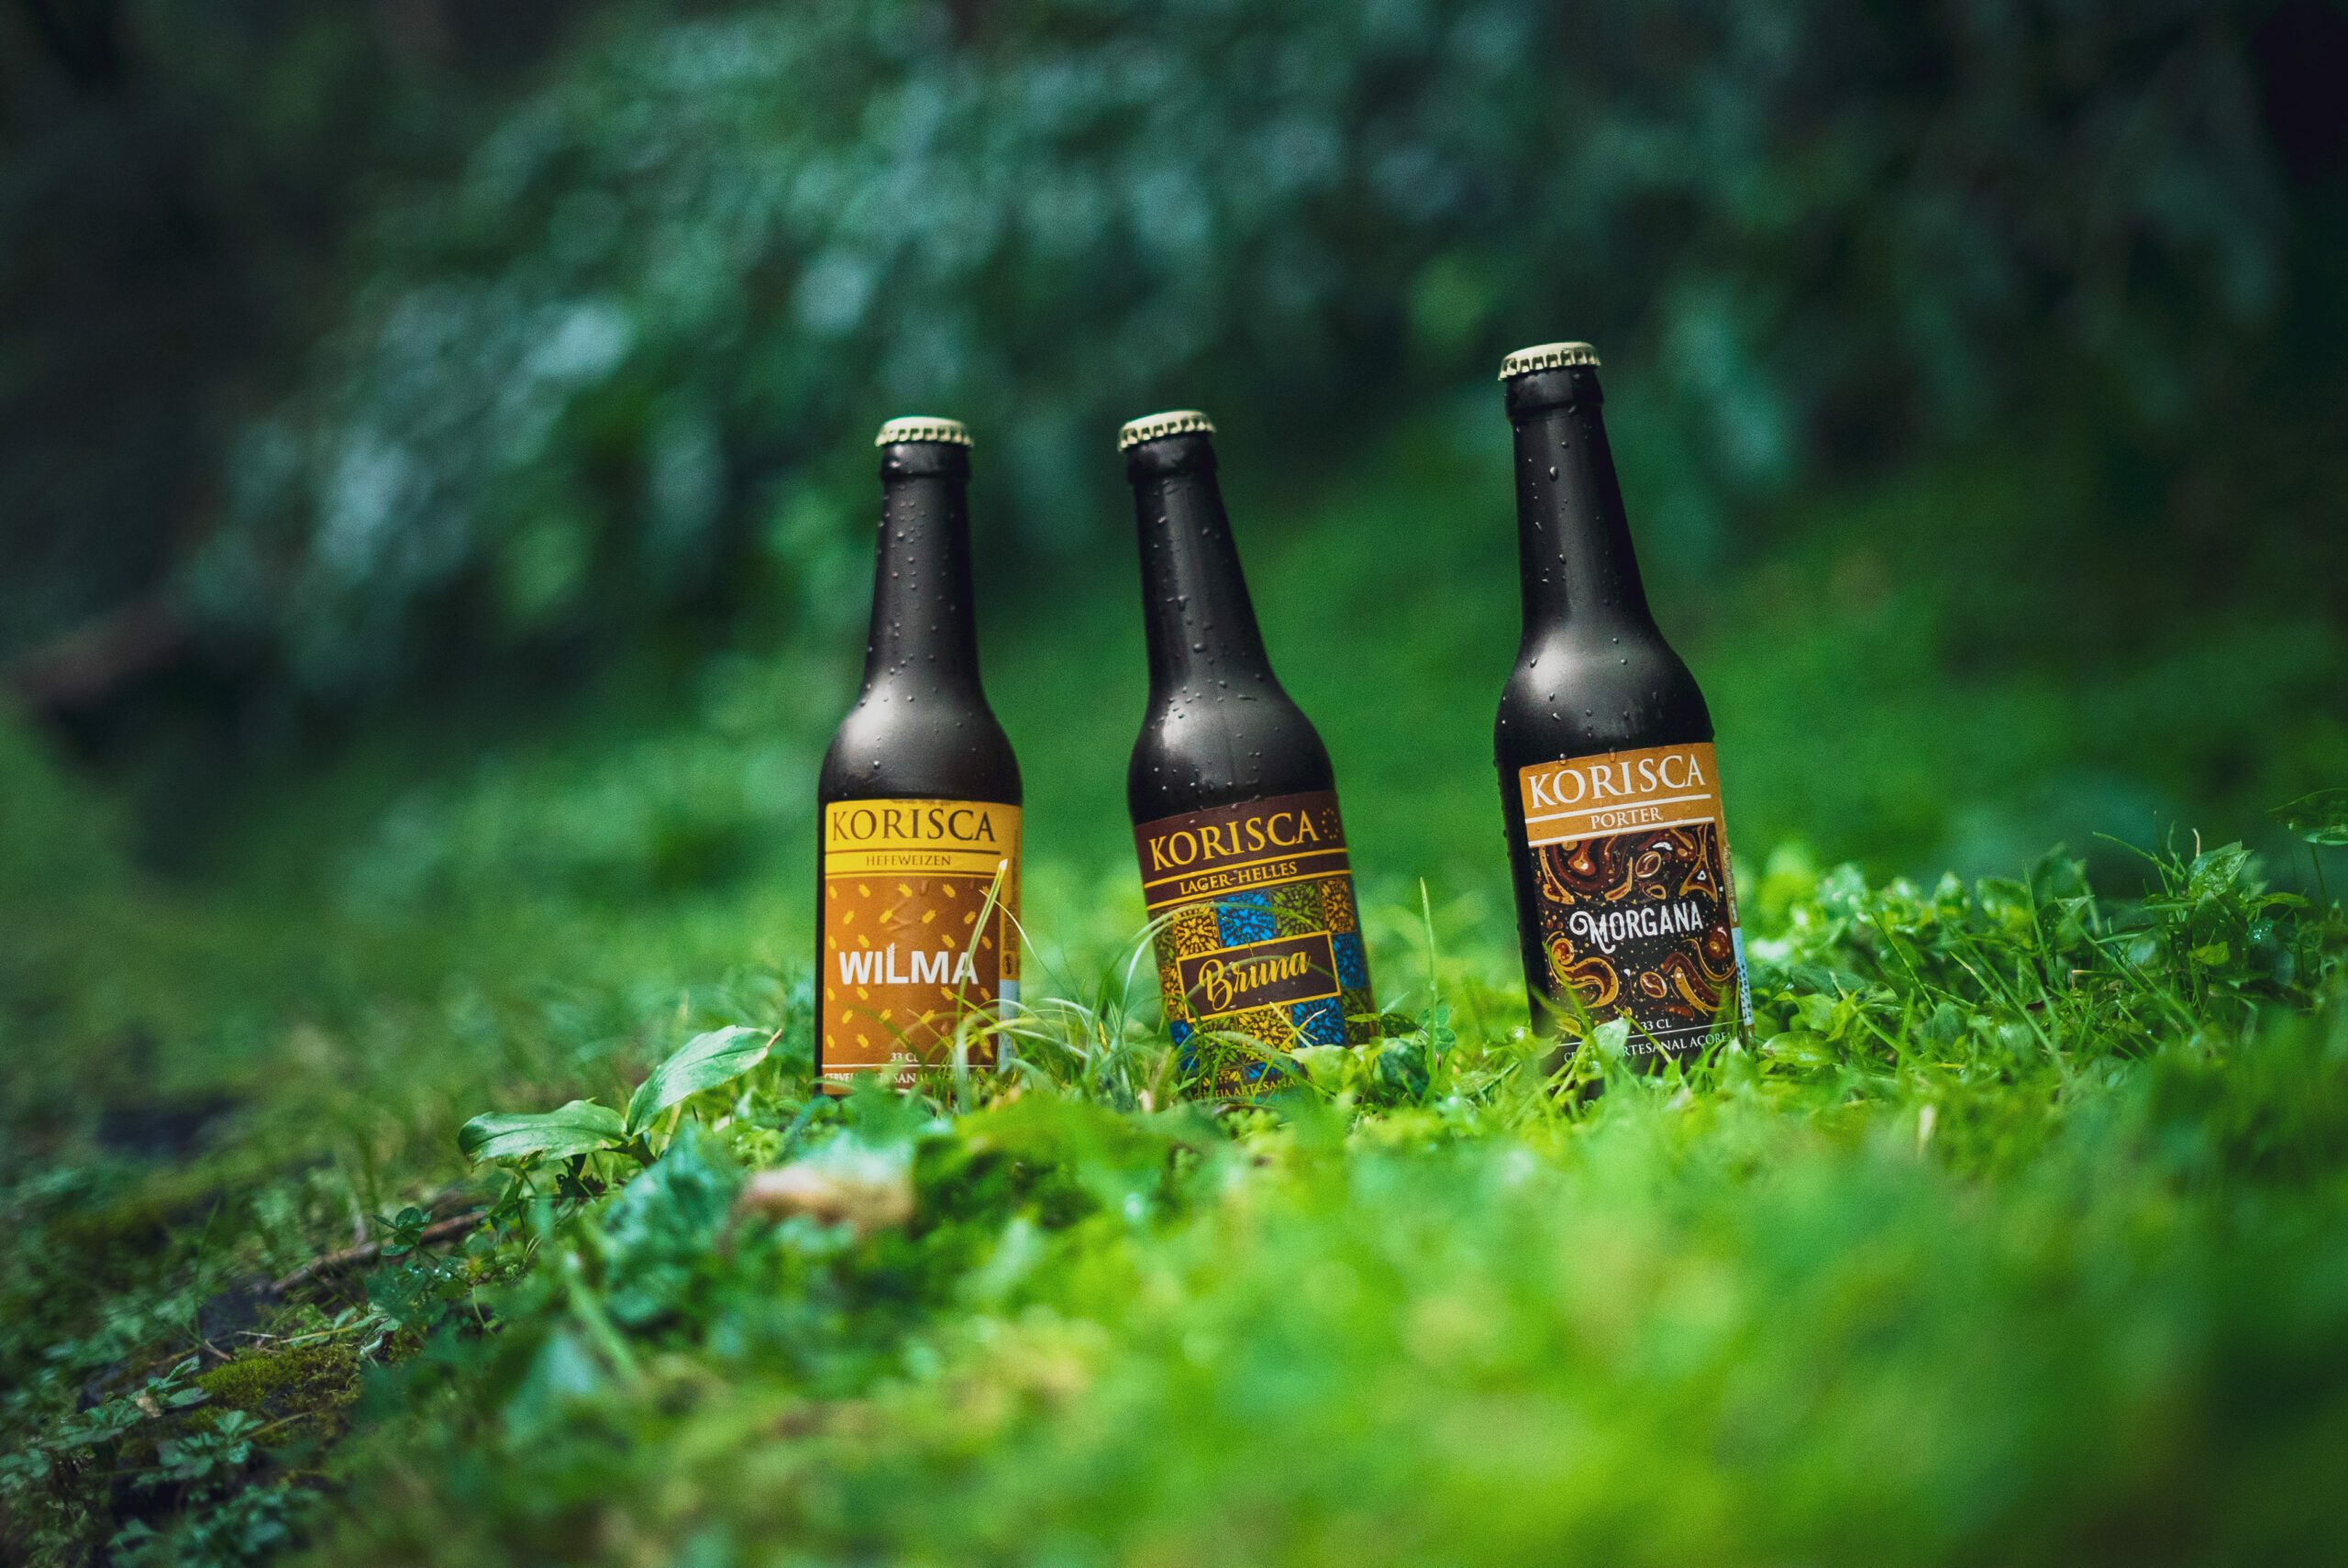 Three Korisca craft beers, the Wilma (Hefeweizen), the Bruna (Lager-Helles) and the Morgana (Porter), on the floor with green leaves, and in the background green vegetationSete Cidades, Ponta Delgada, São Miguel, Azores.